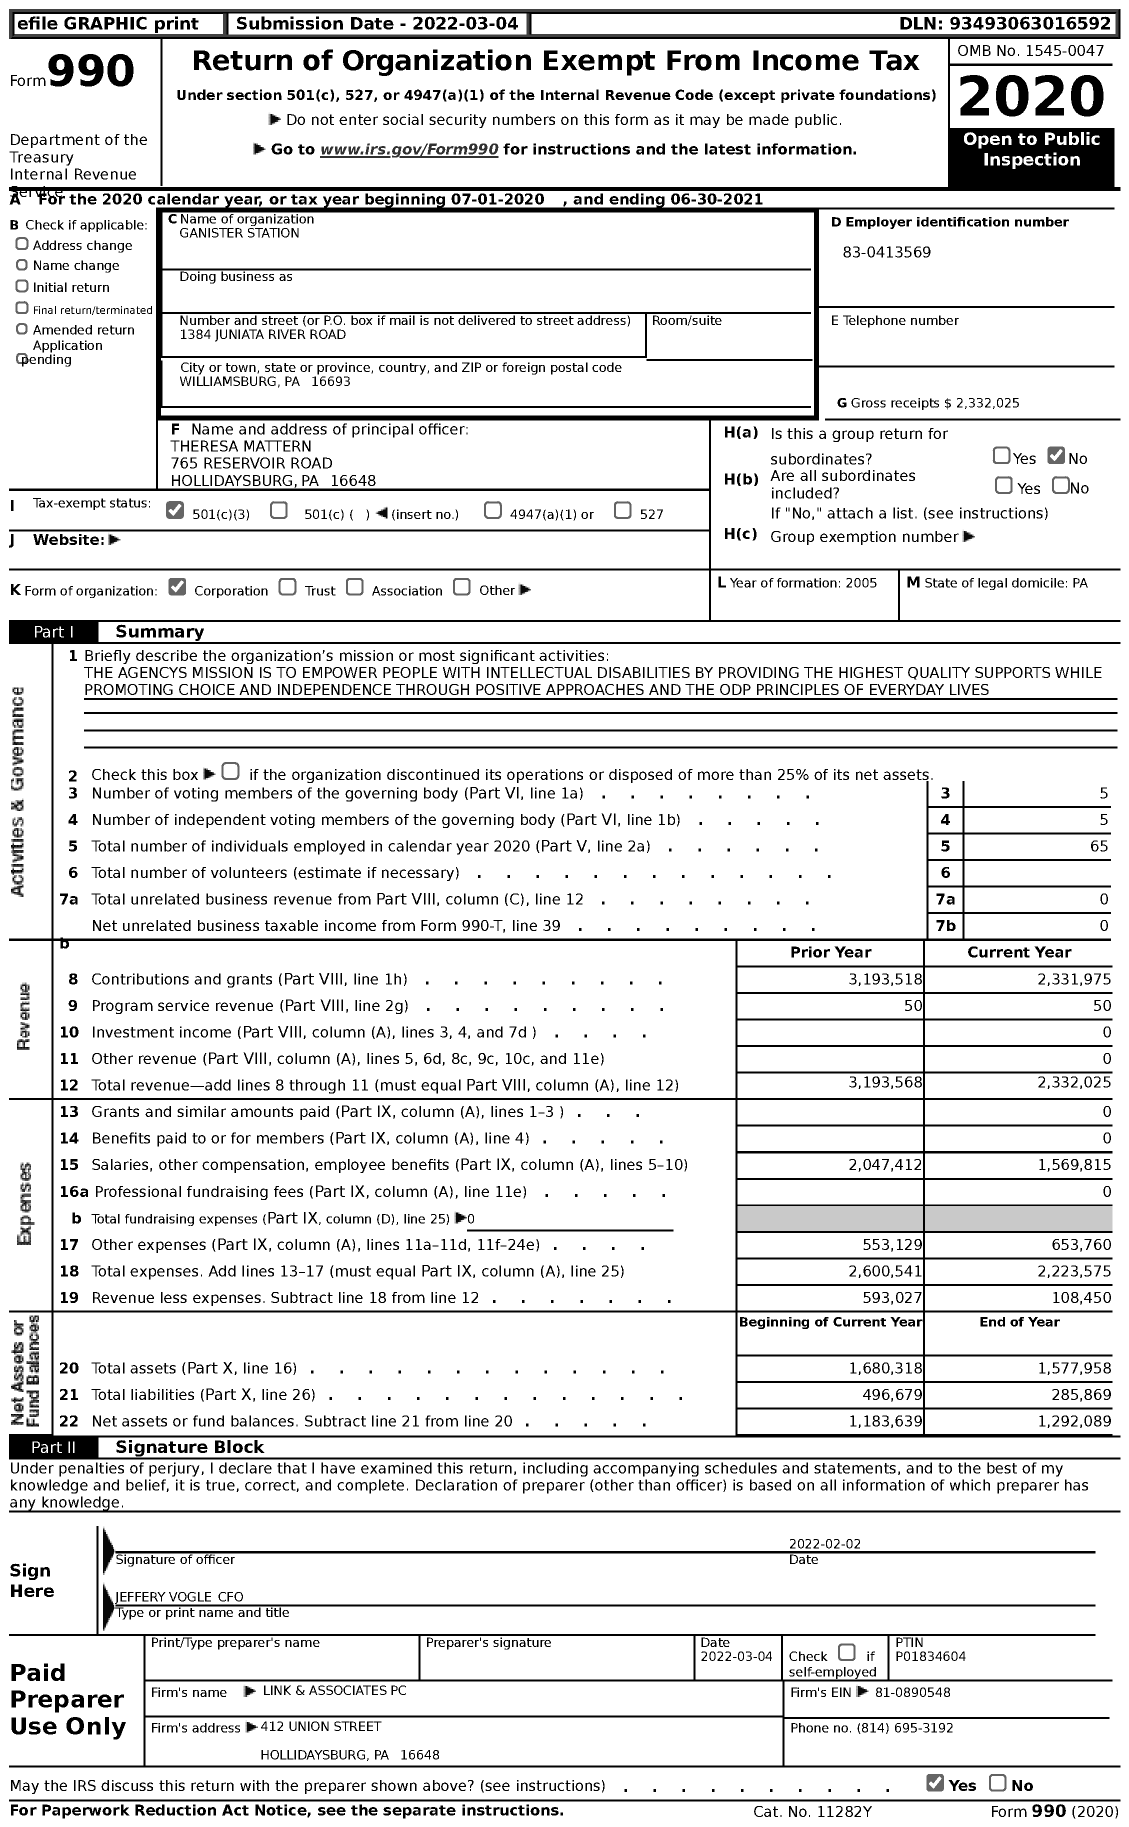 Image of first page of 2020 Form 990 for Ganister Station